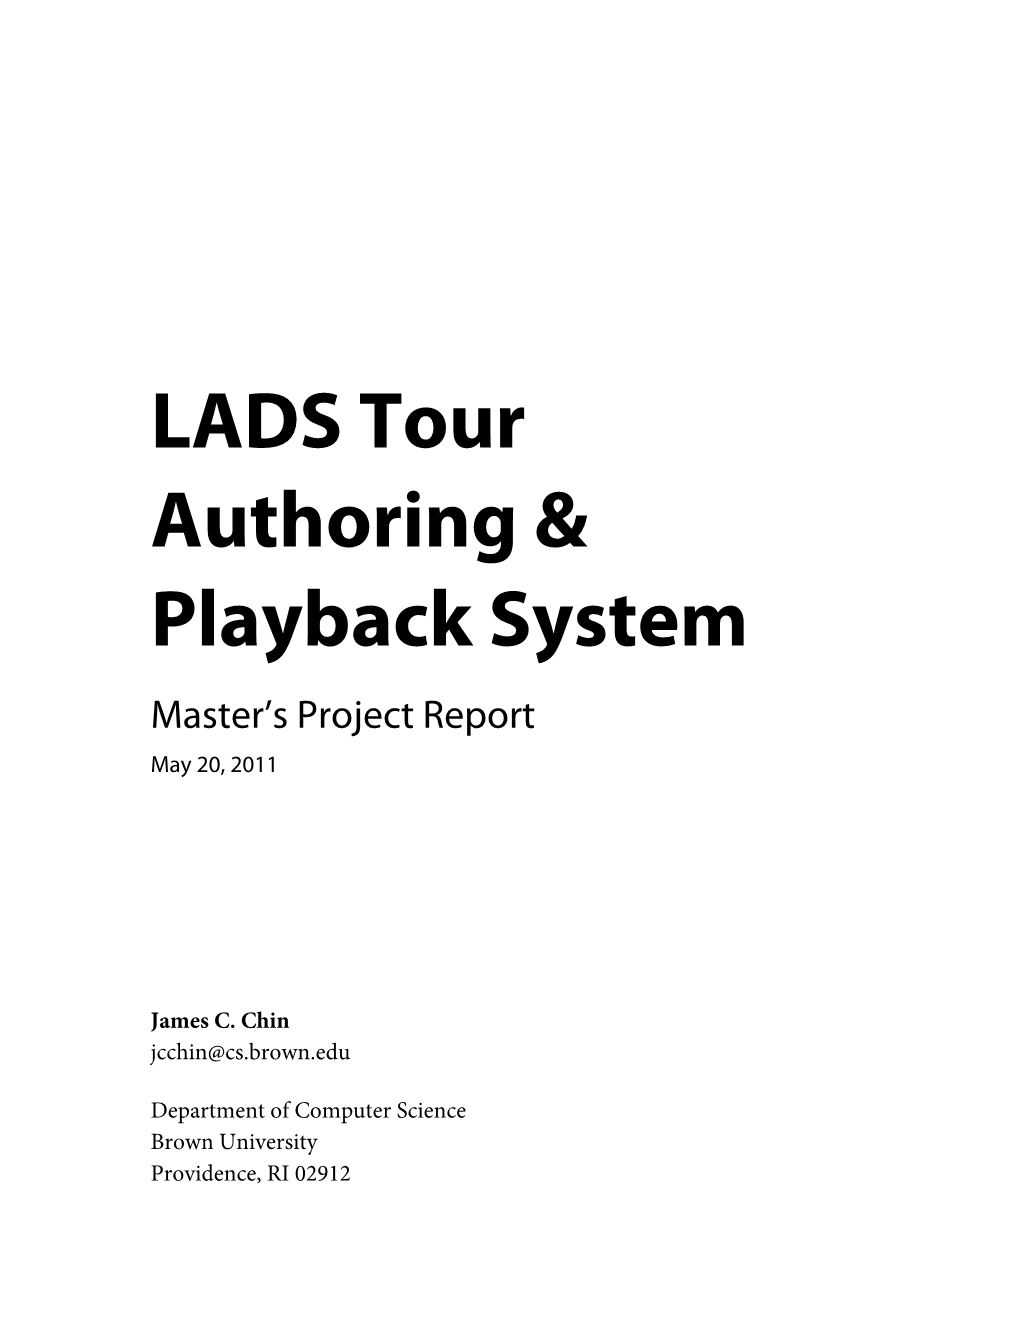 LADS Tour Authoring & Playback System